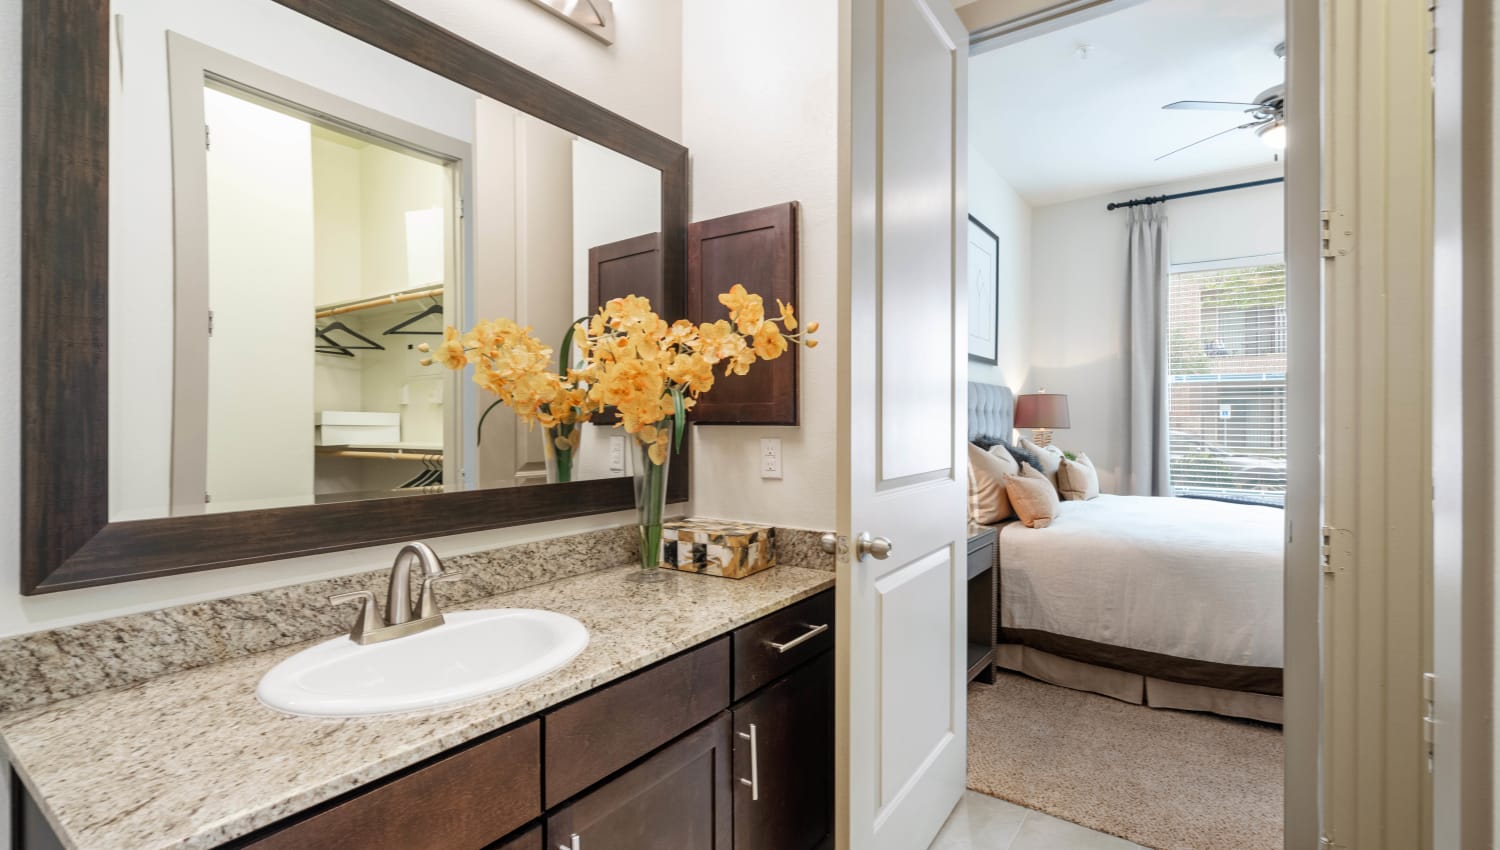 Oversized vanity mirror and a granite countertop in a model home's master bathroom at Olympus Sierra Pines in The Woodlands, Texas